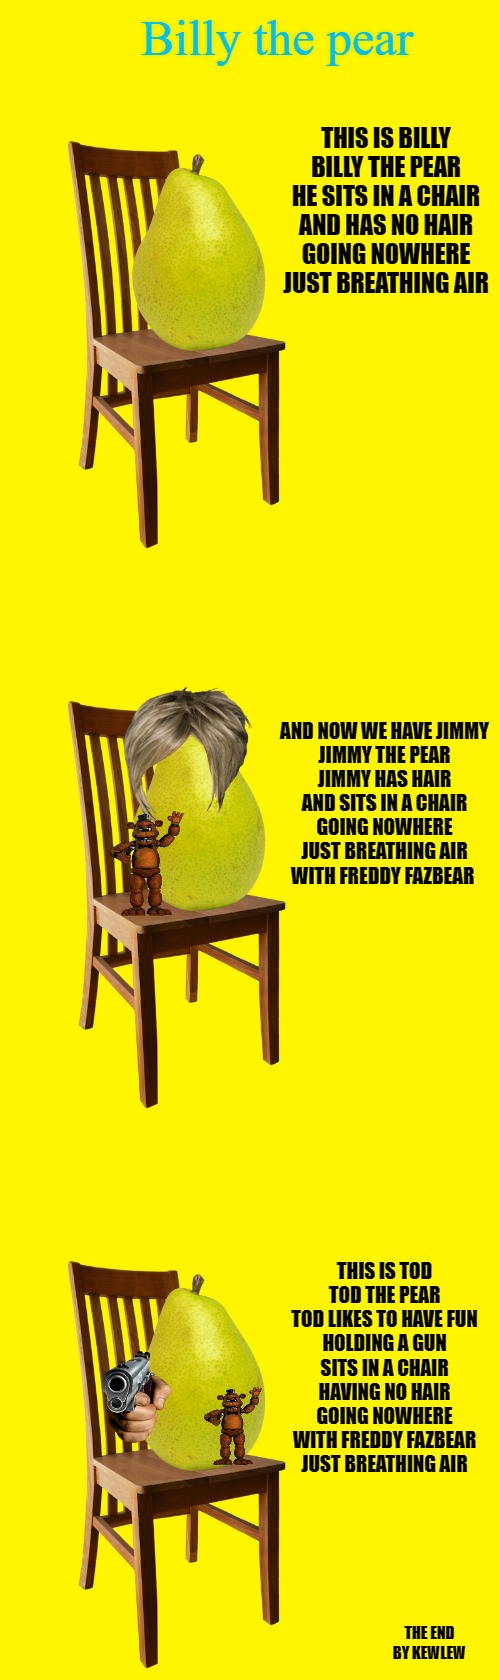 A poem by kewlew | Billy the pear; THIS IS BILLY
BILLY THE PEAR
HE SITS IN A CHAIR
AND HAS NO HAIR
GOING NOWHERE
JUST BREATHING AIR; AND NOW WE HAVE JIMMY
JIMMY THE PEAR
JIMMY HAS HAIR
AND SITS IN A CHAIR
GOING NOWHERE
JUST BREATHING AIR
WITH FREDDY FAZBEAR; THIS IS TOD
TOD THE PEAR
TOD LIKES TO HAVE FUN
HOLDING A GUN
SITS IN A CHAIR
HAVING NO HAIR
GOING NOWHERE
WITH FREDDY FAZBEAR
JUST BREATHING AIR; THE END
BY KEWLEW | image tagged in pear,poem,kewlew | made w/ Imgflip meme maker